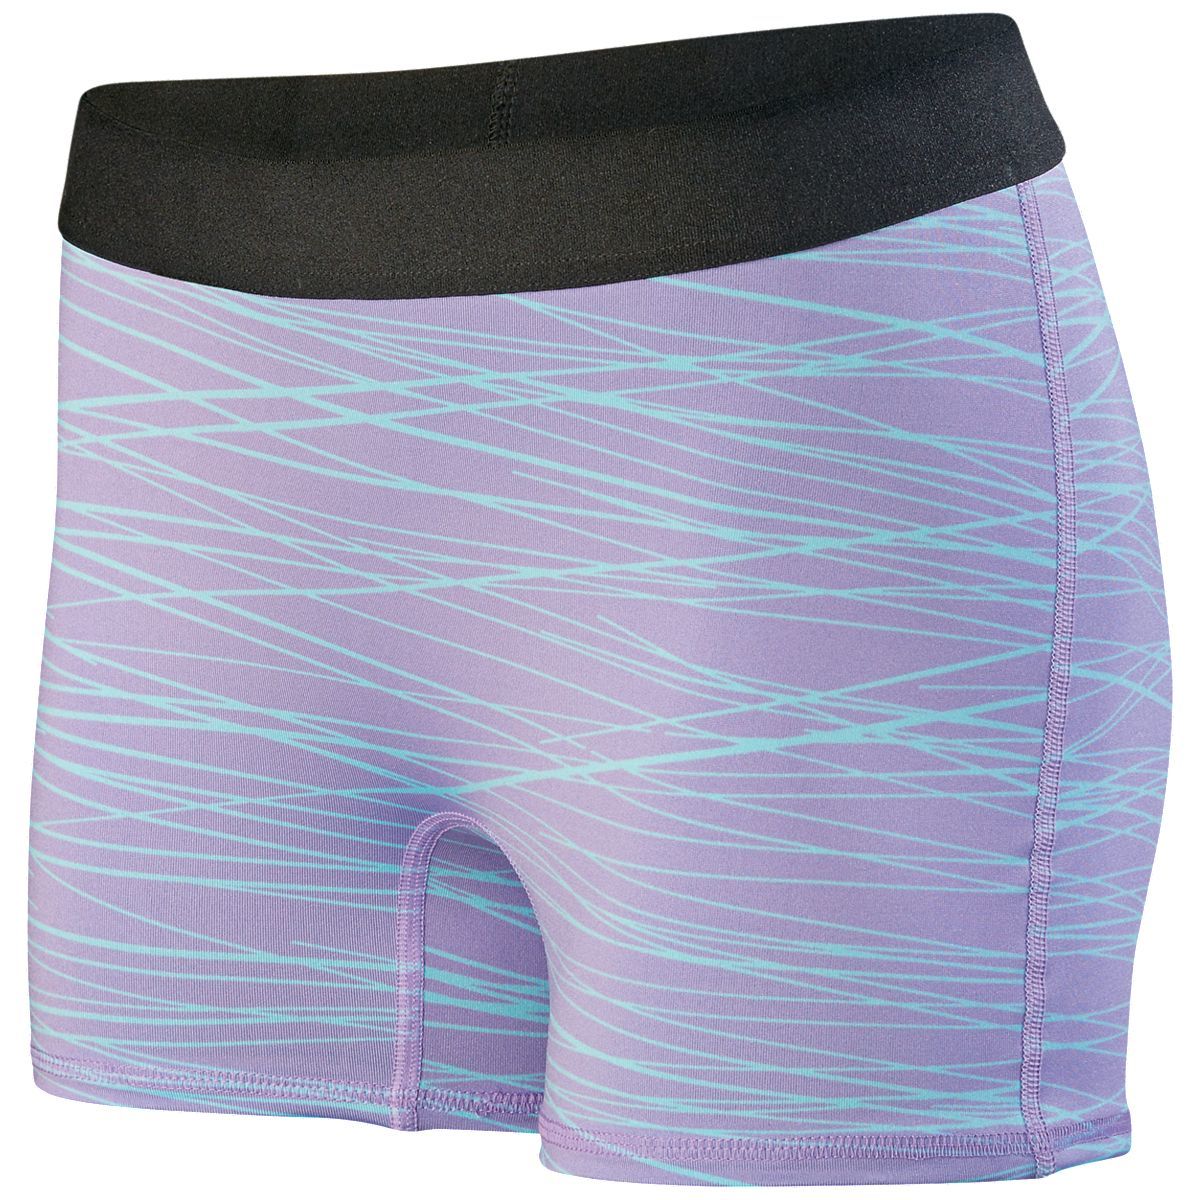 Augusta Sportswear Ladies Hyperform Fitted Shorts in Light Lavender/Aqua Print  -Part of the Ladies, Ladies-Shorts, Augusta-Products product lines at KanaleyCreations.com